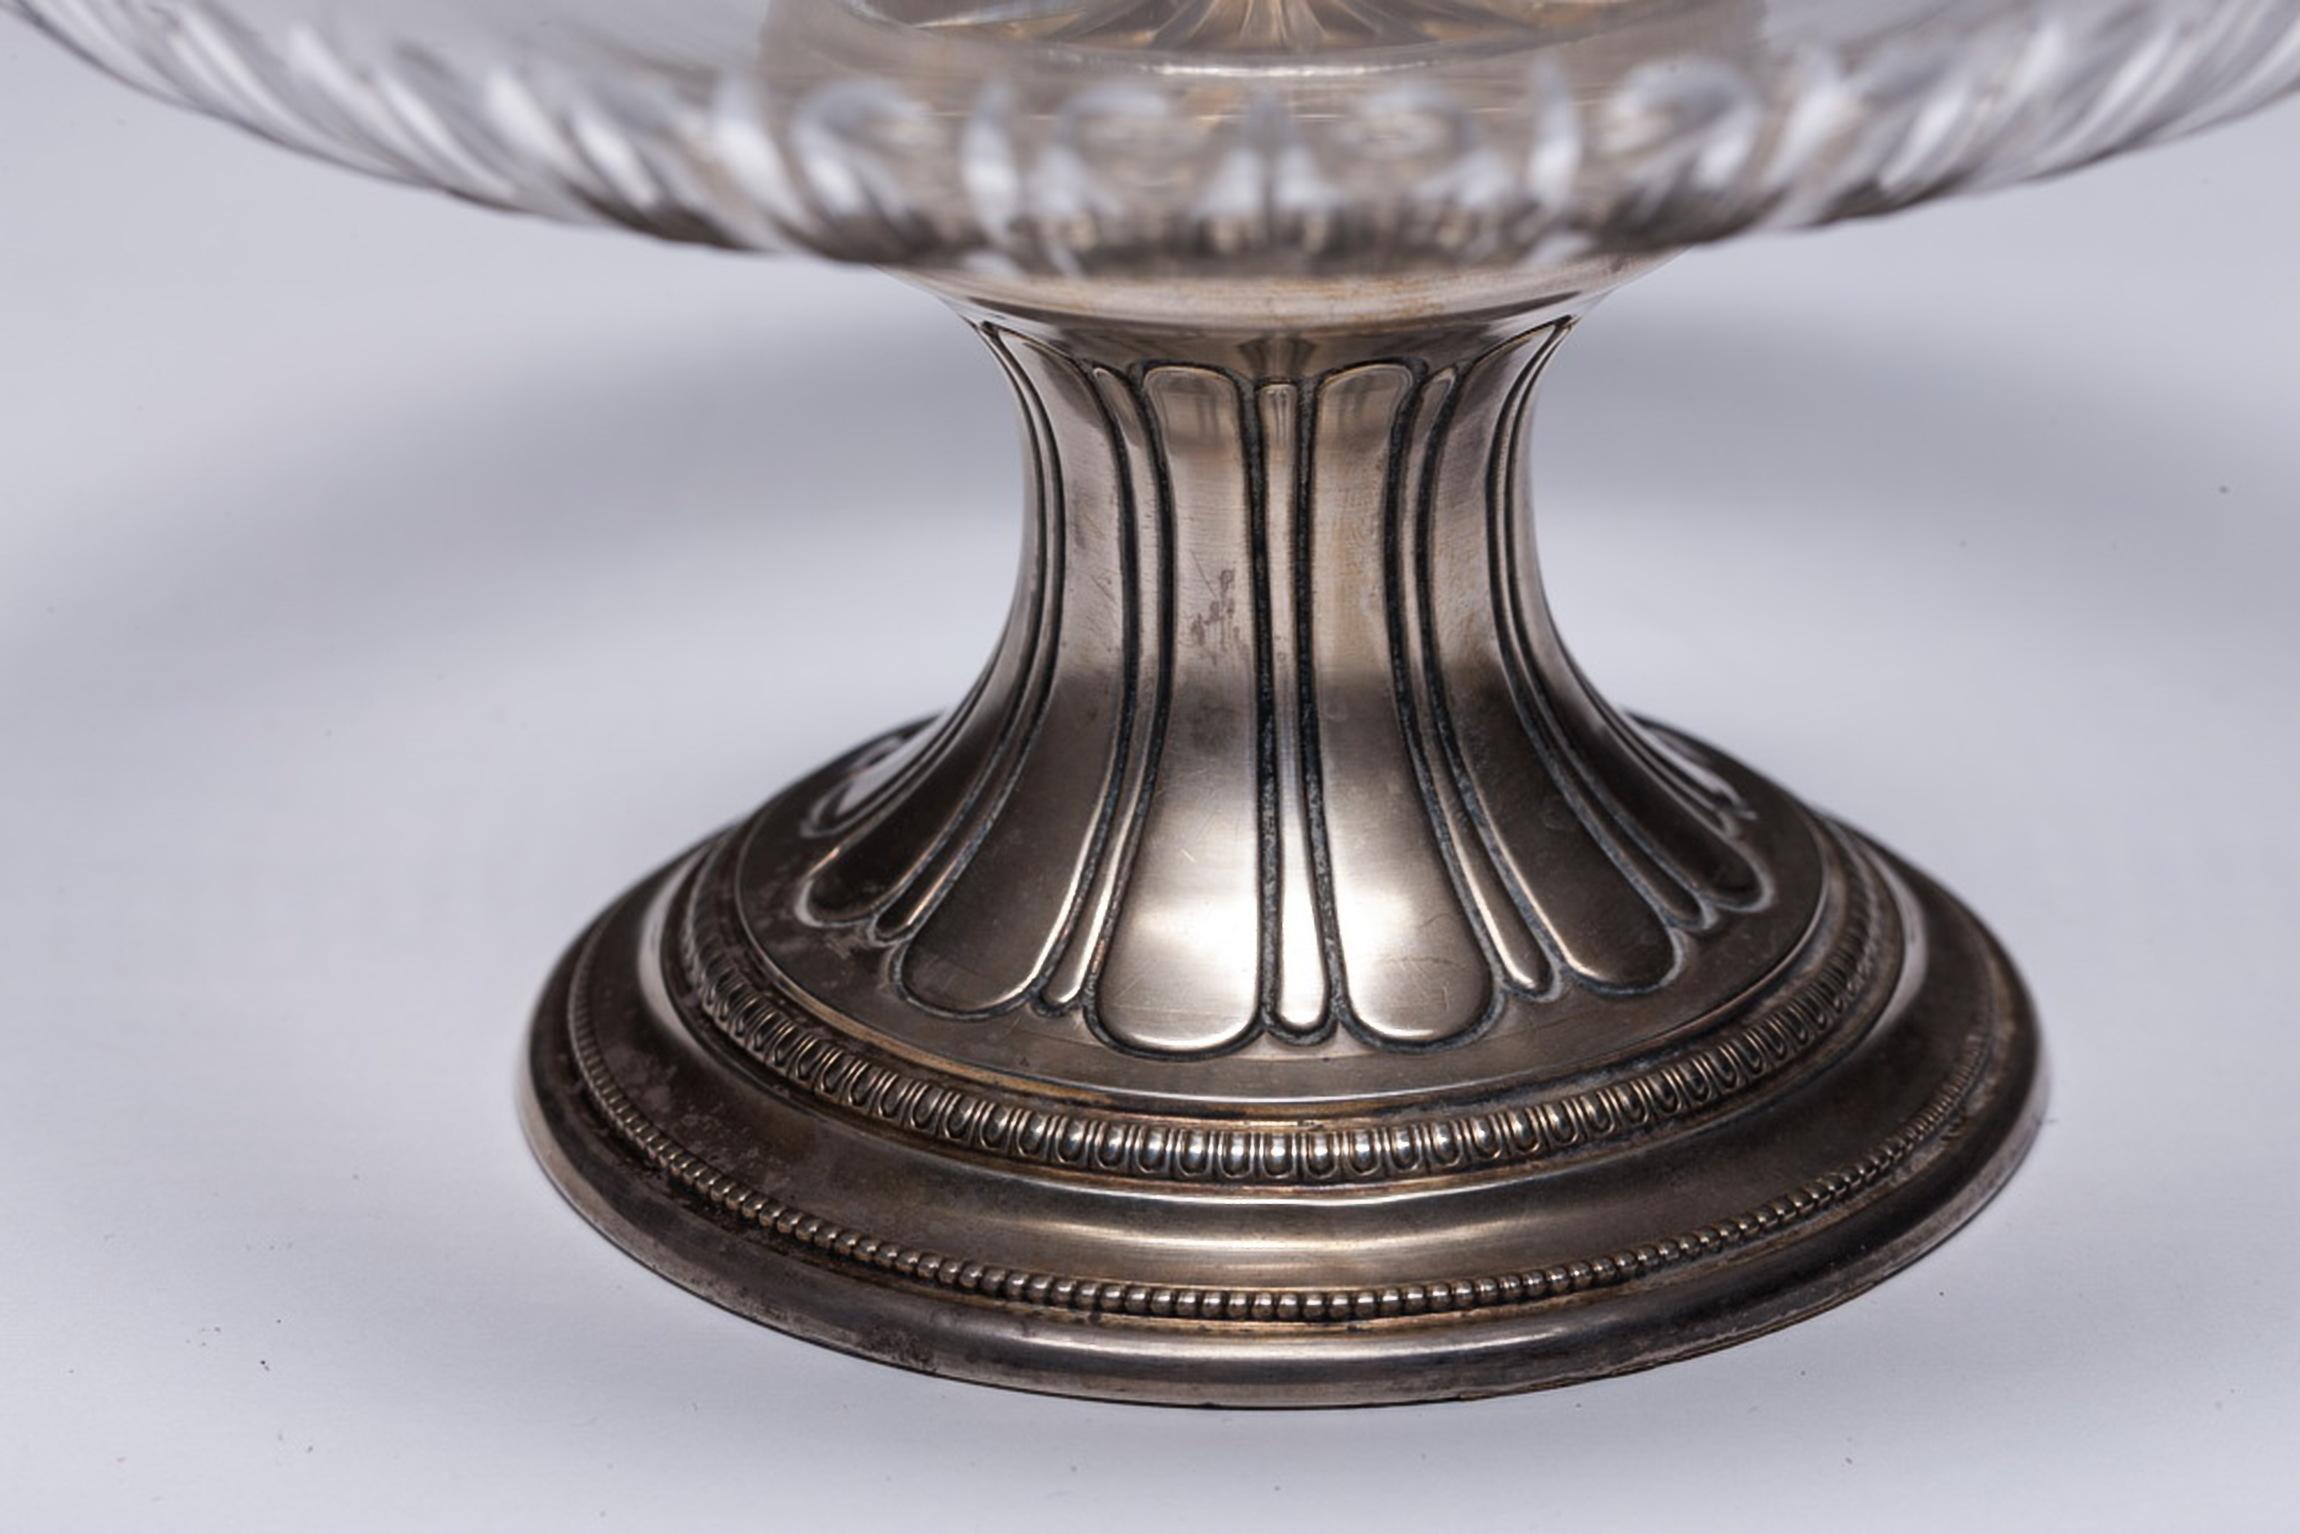 Neoclassical Revival 19th Century French Silver Plated Crystal Bowl Centerpiece For Sale